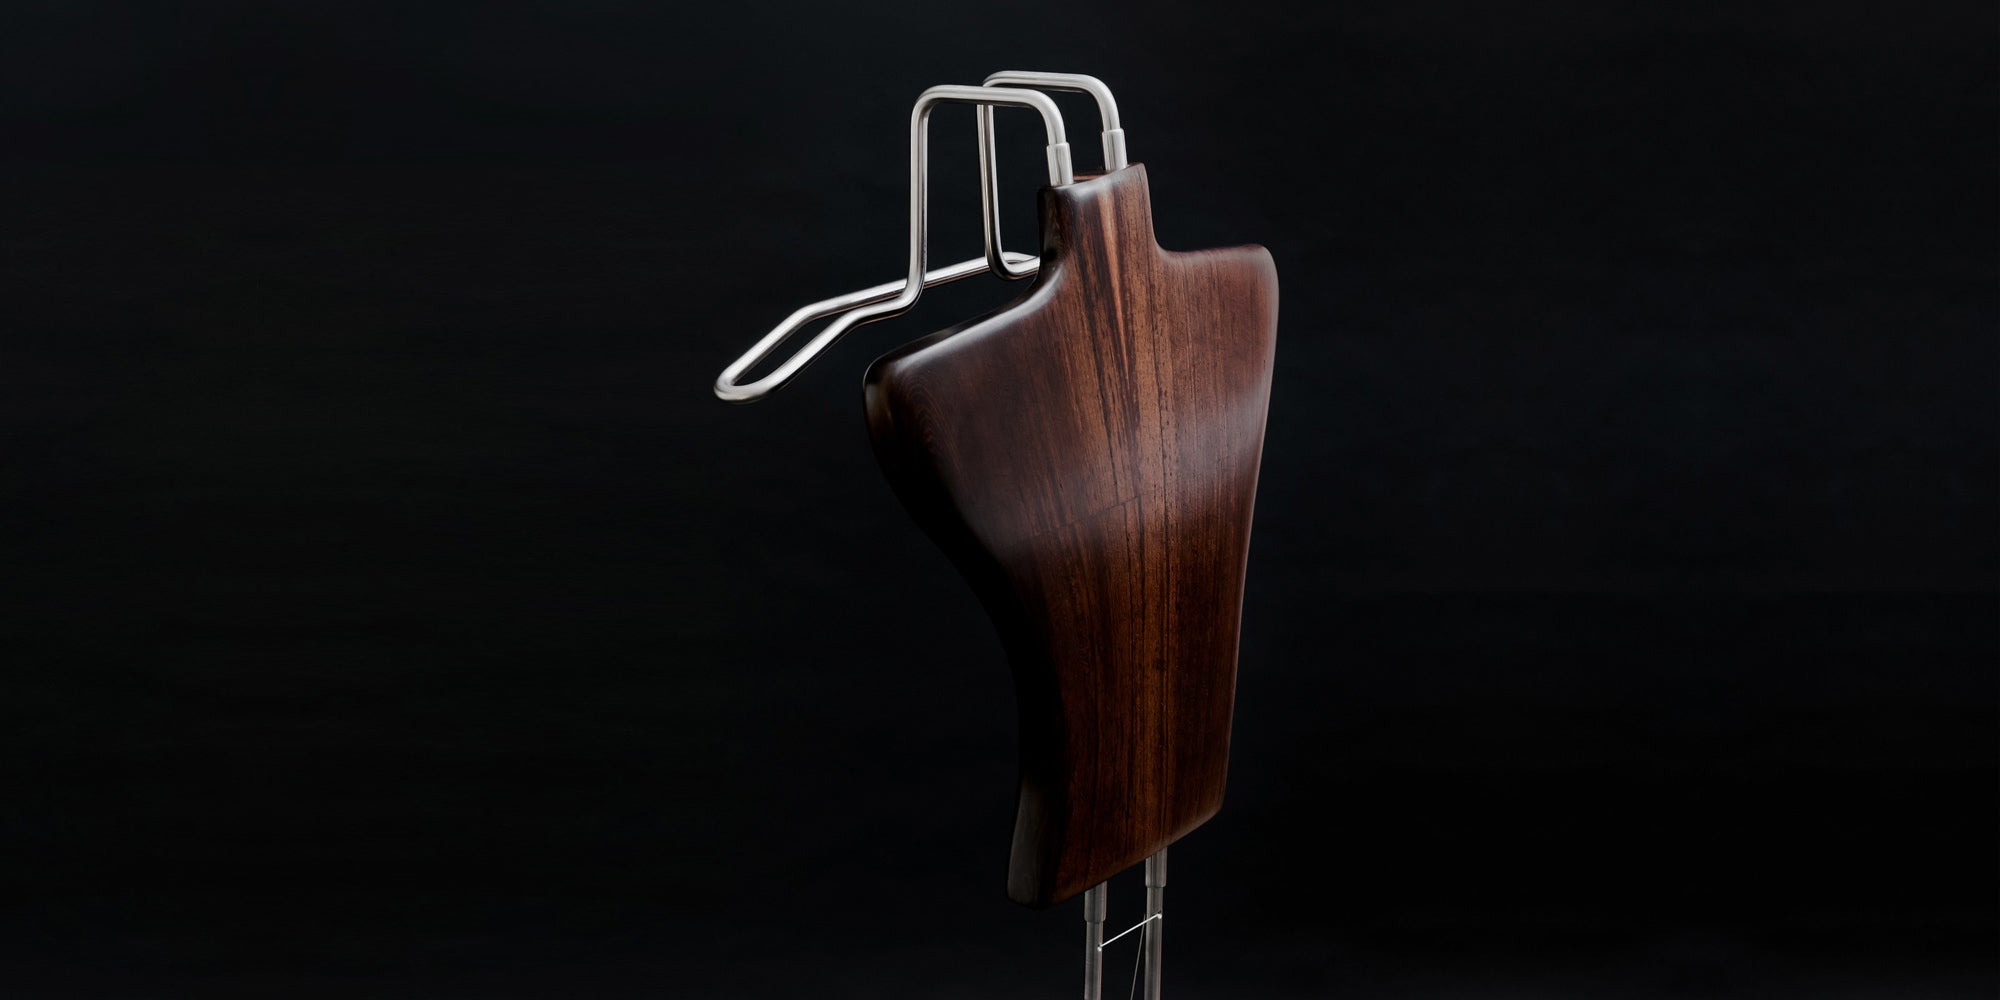 Clothes hanger - Butler is a combination of the best design and functionality. The Gentleman's Retainer is designed for interior spaces as a practical object that allows for the planning of outfits in order to fully preserve their original shapes,